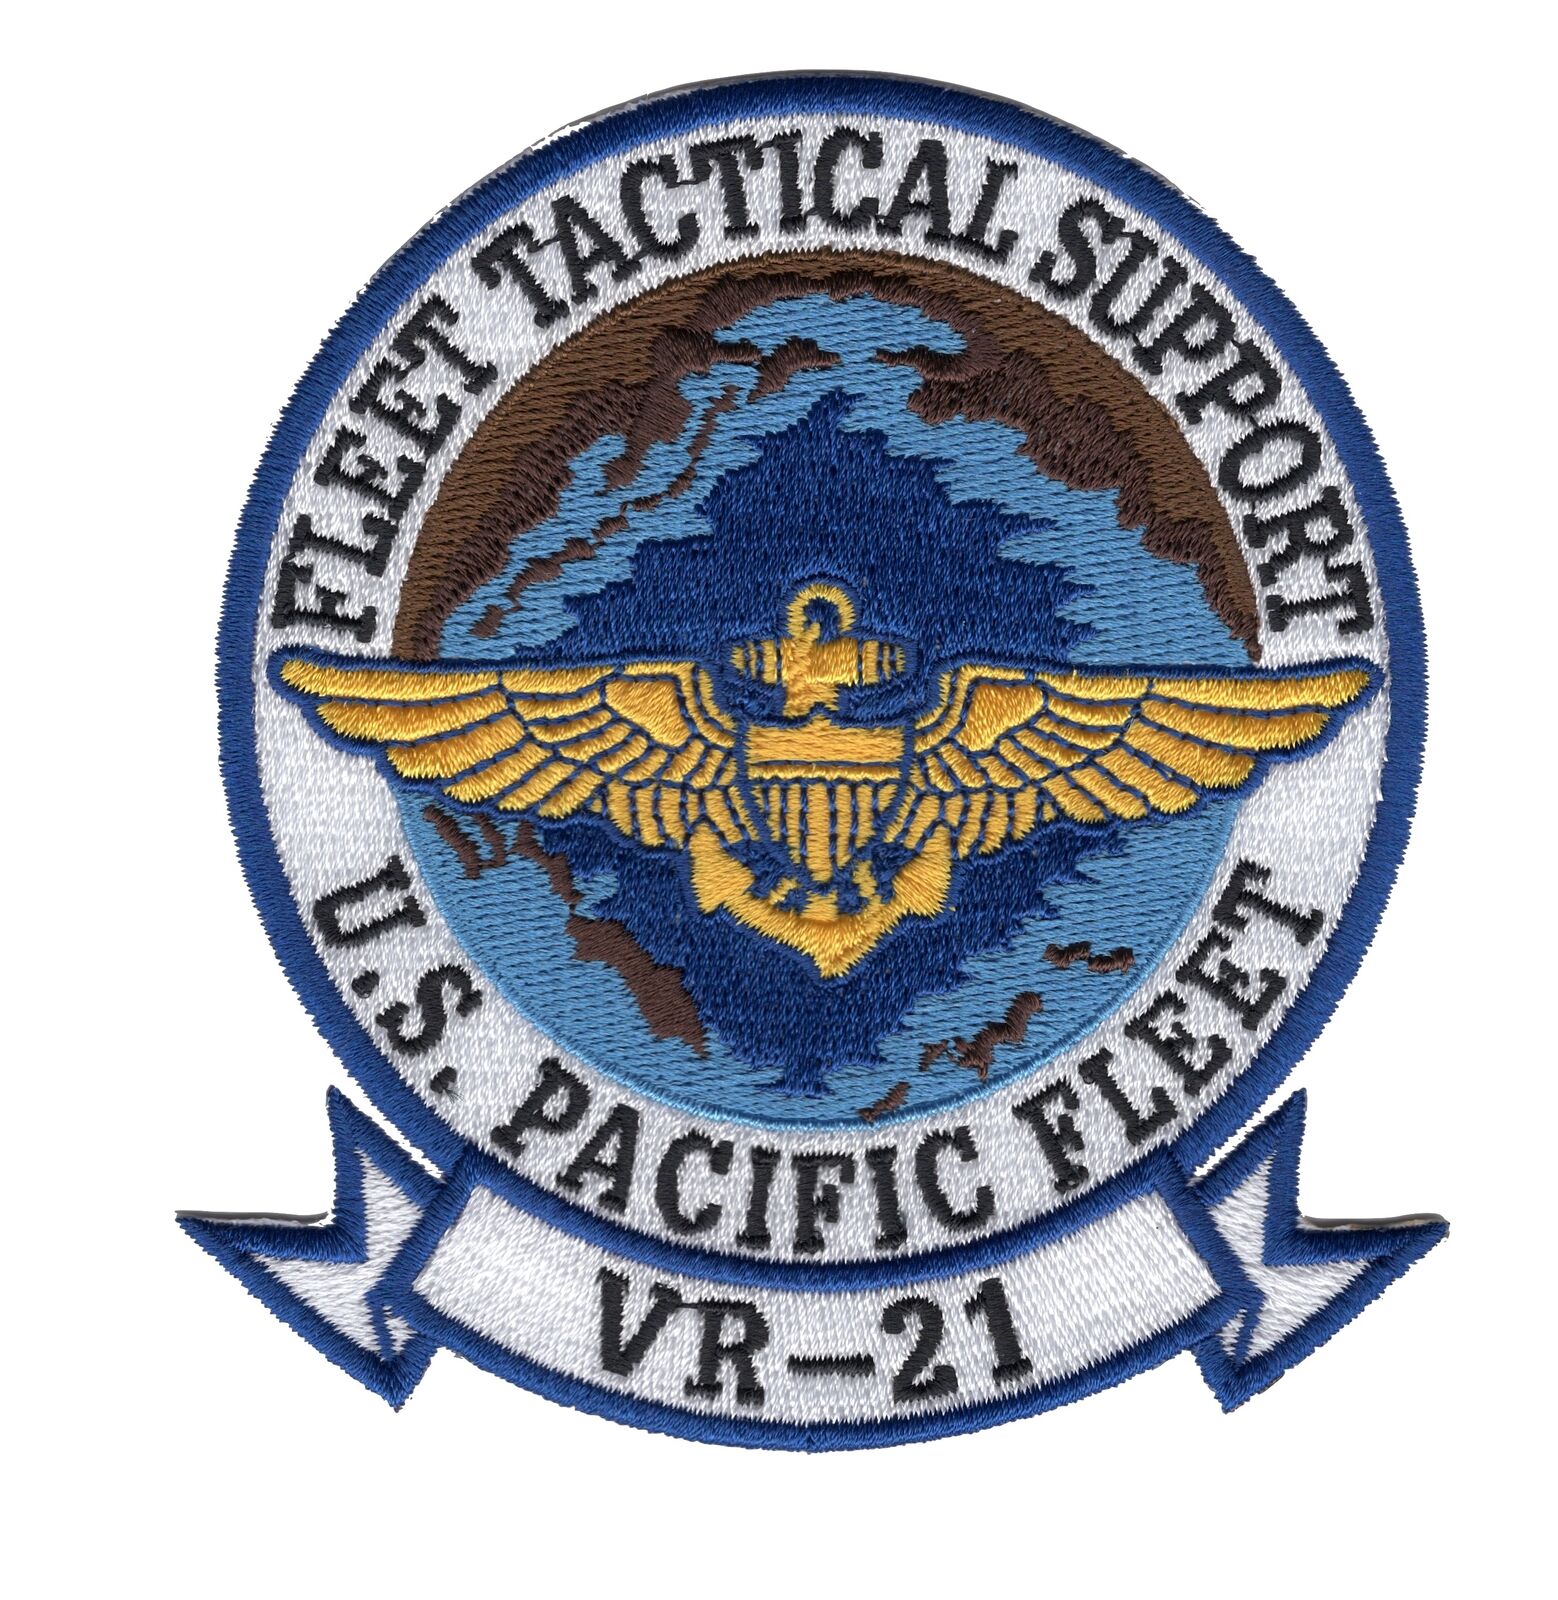 VR-21 Fleet Tactical Support Air Transport Squadron Patch - Pacific Fleet